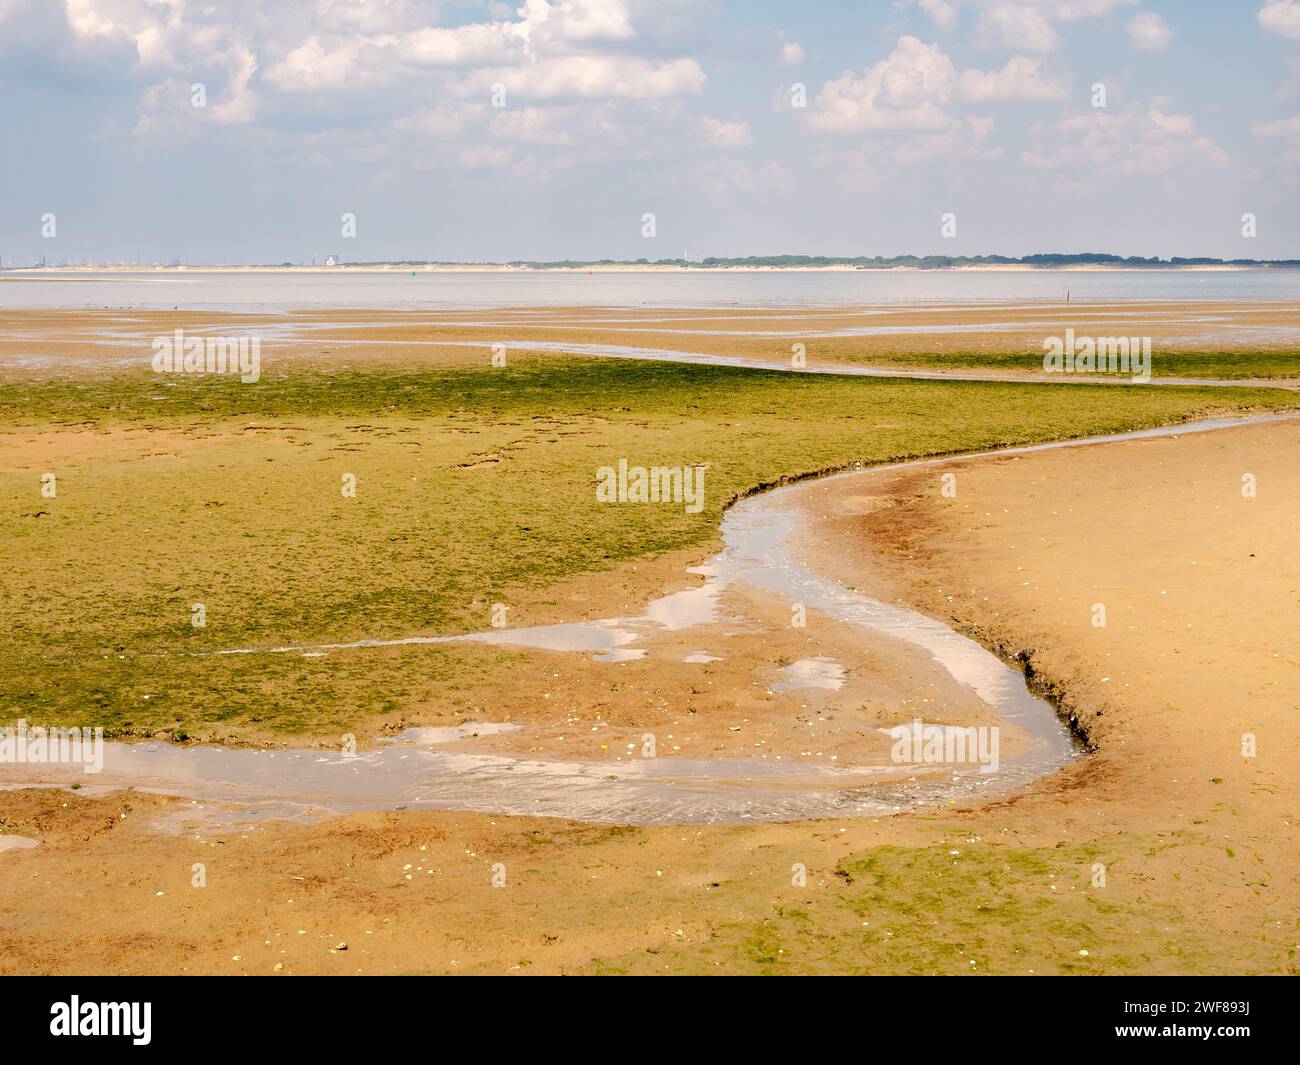 Mudflat with rill, algae and seaweed at low tide draining into Slijkgat channel, near nature reserve Kwade Hoek, Stellendam, Netherlands Stock Photo